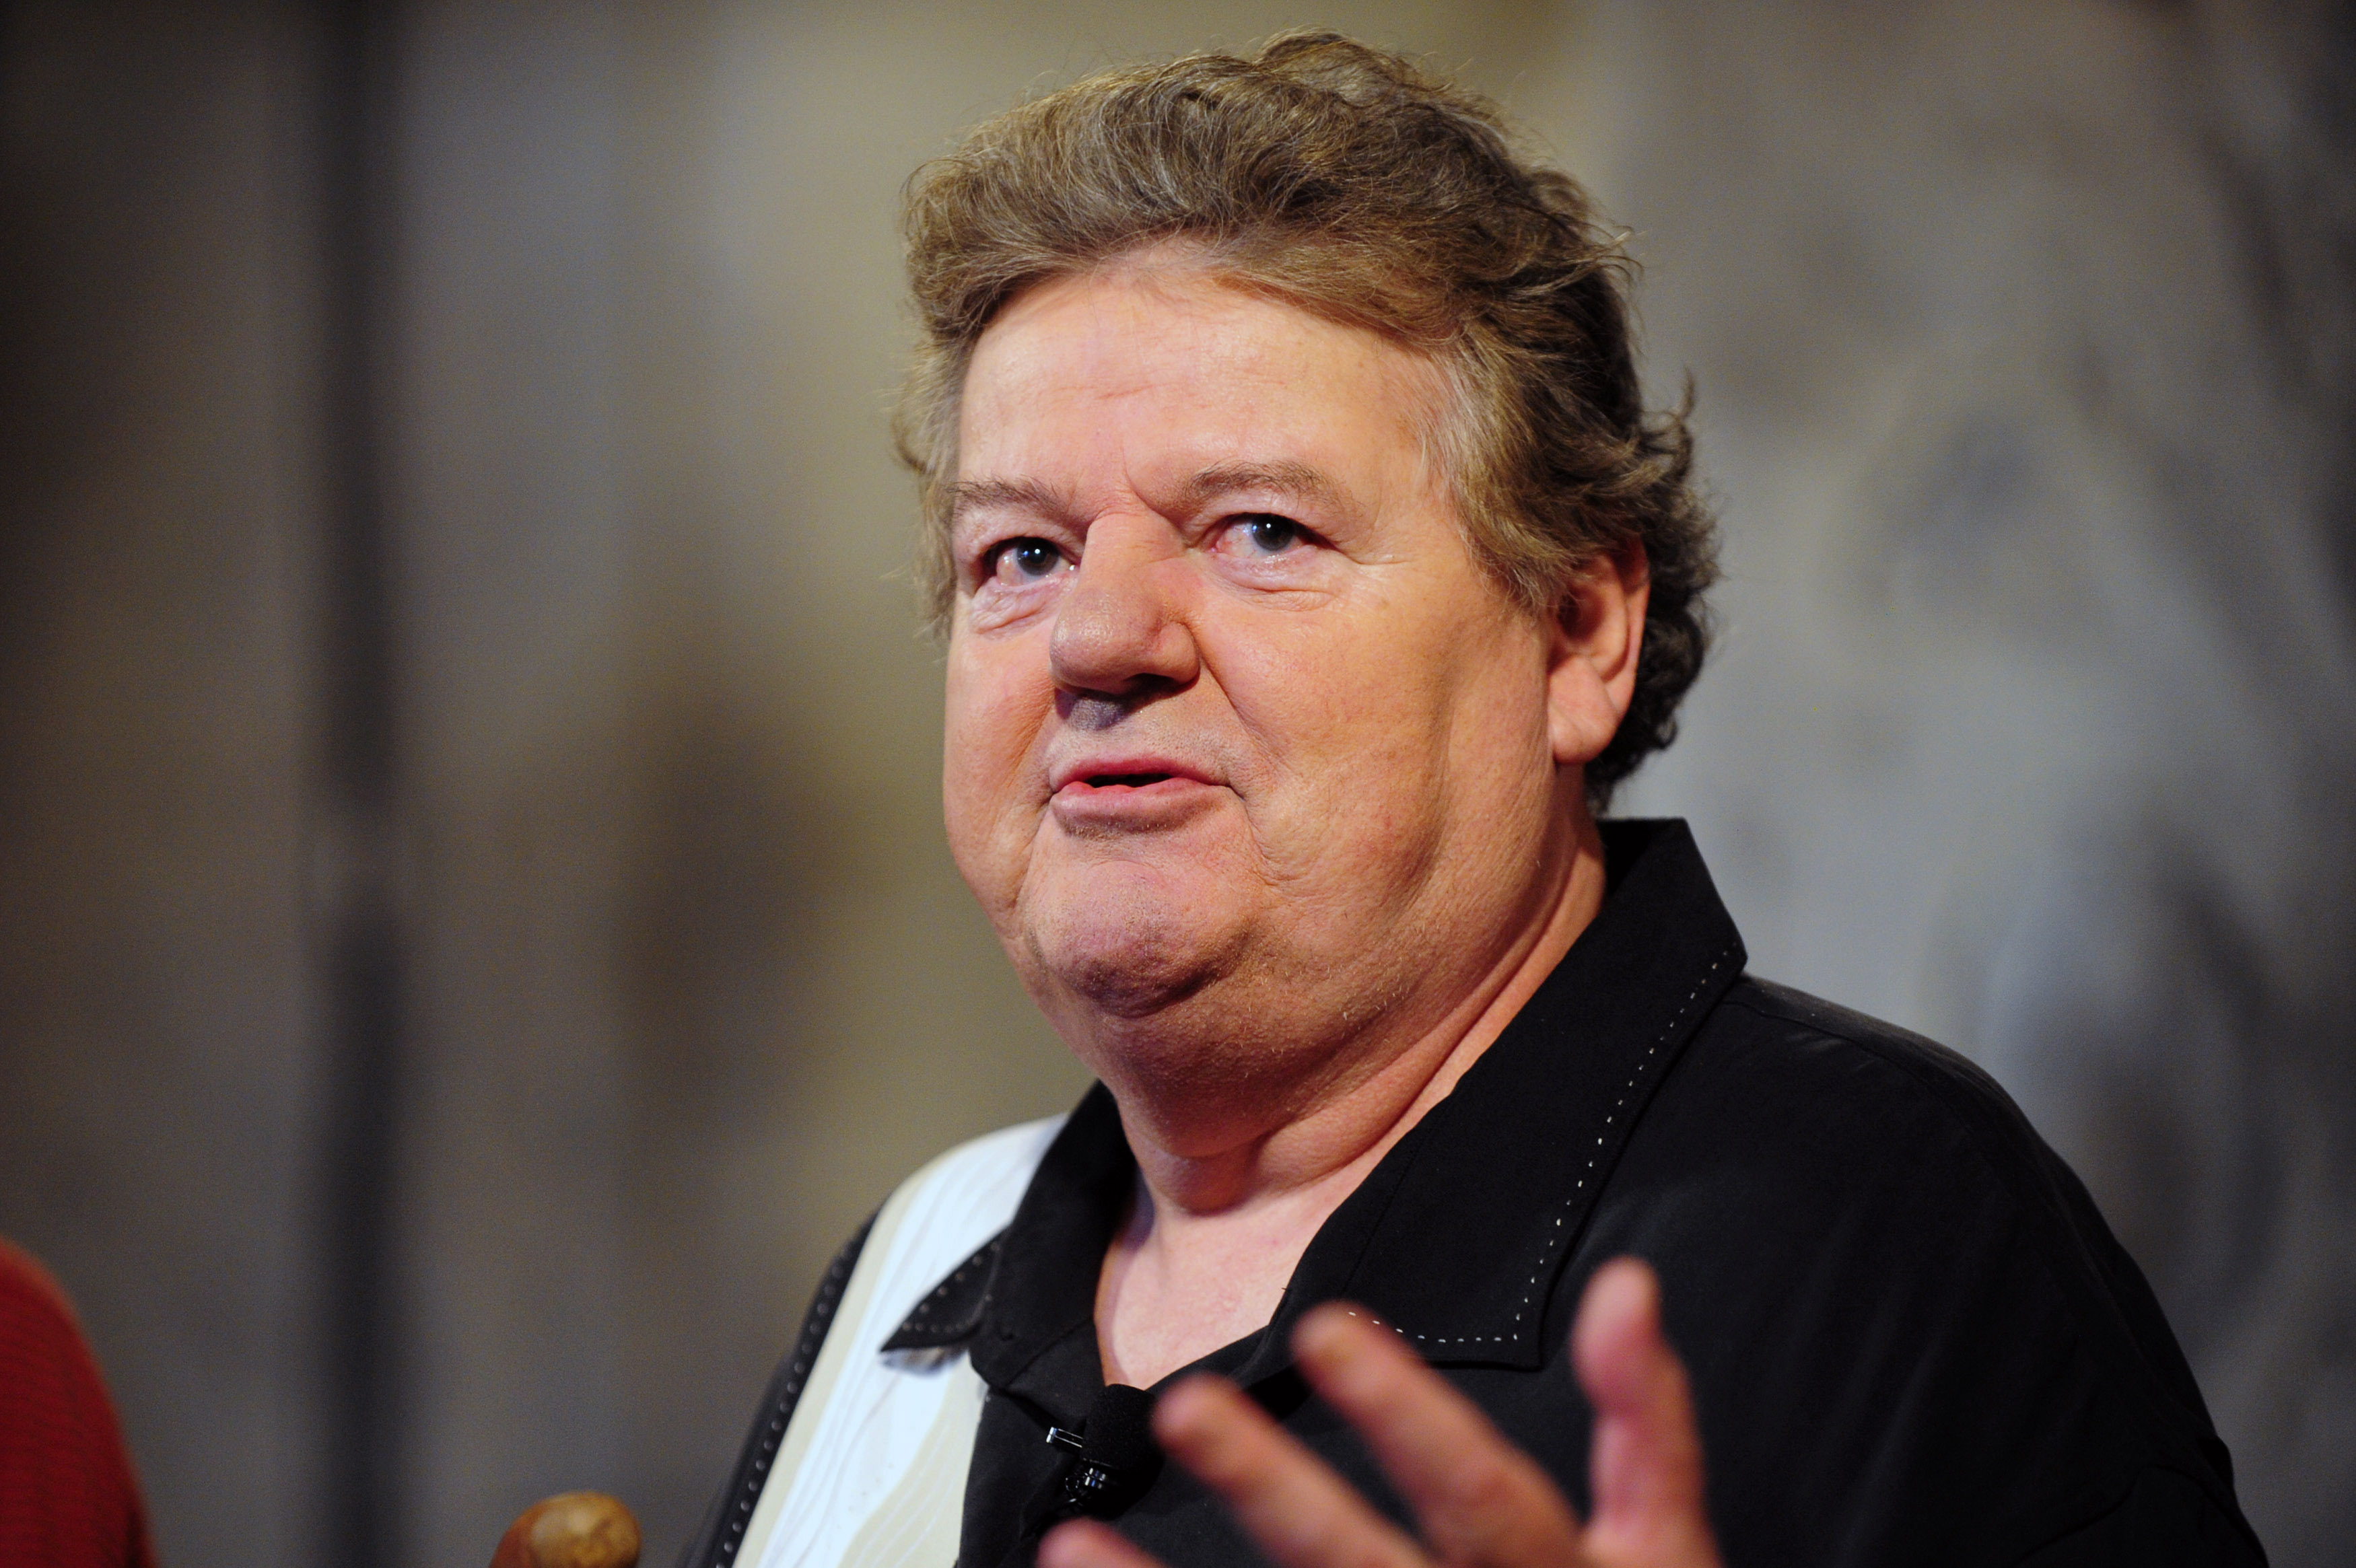 Actor Robbie Coltrane talks during a media preview of The Wizarding World of Harry Potter-Diagon Alley at the Universal Orlando Resort in Orlando